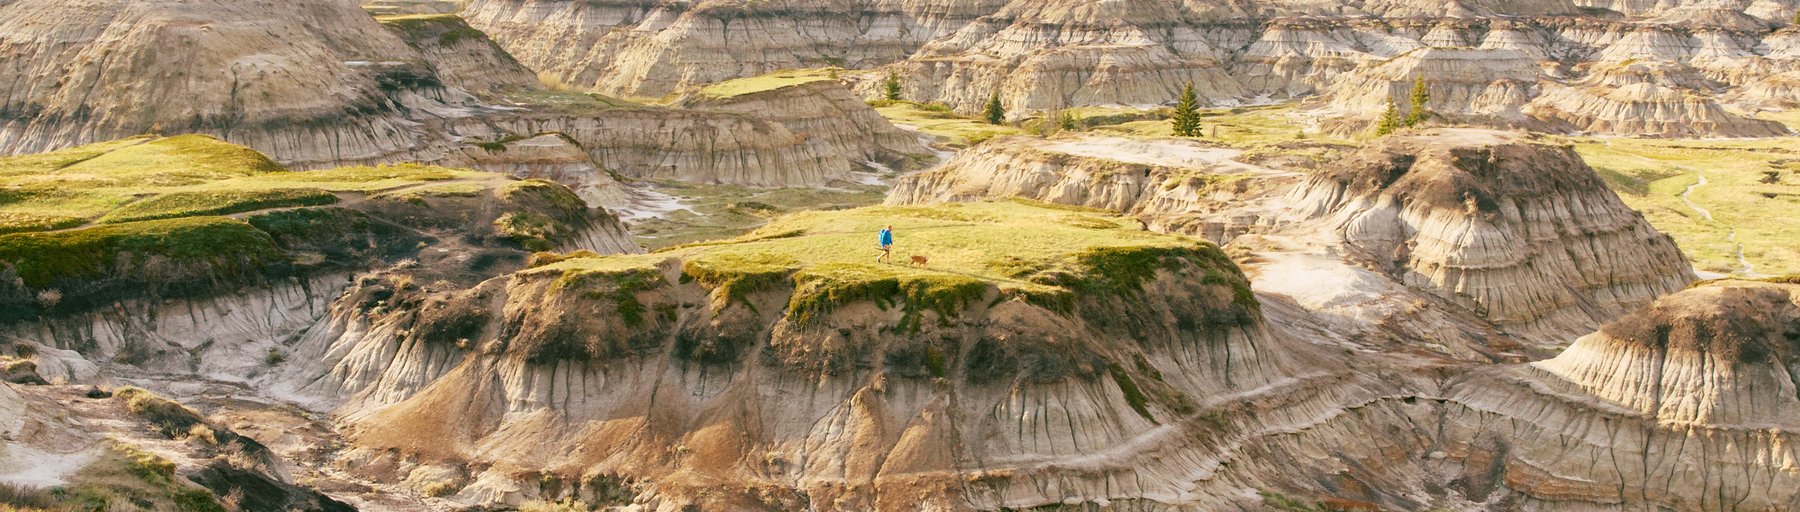 Person and their dog hiking in the badlands